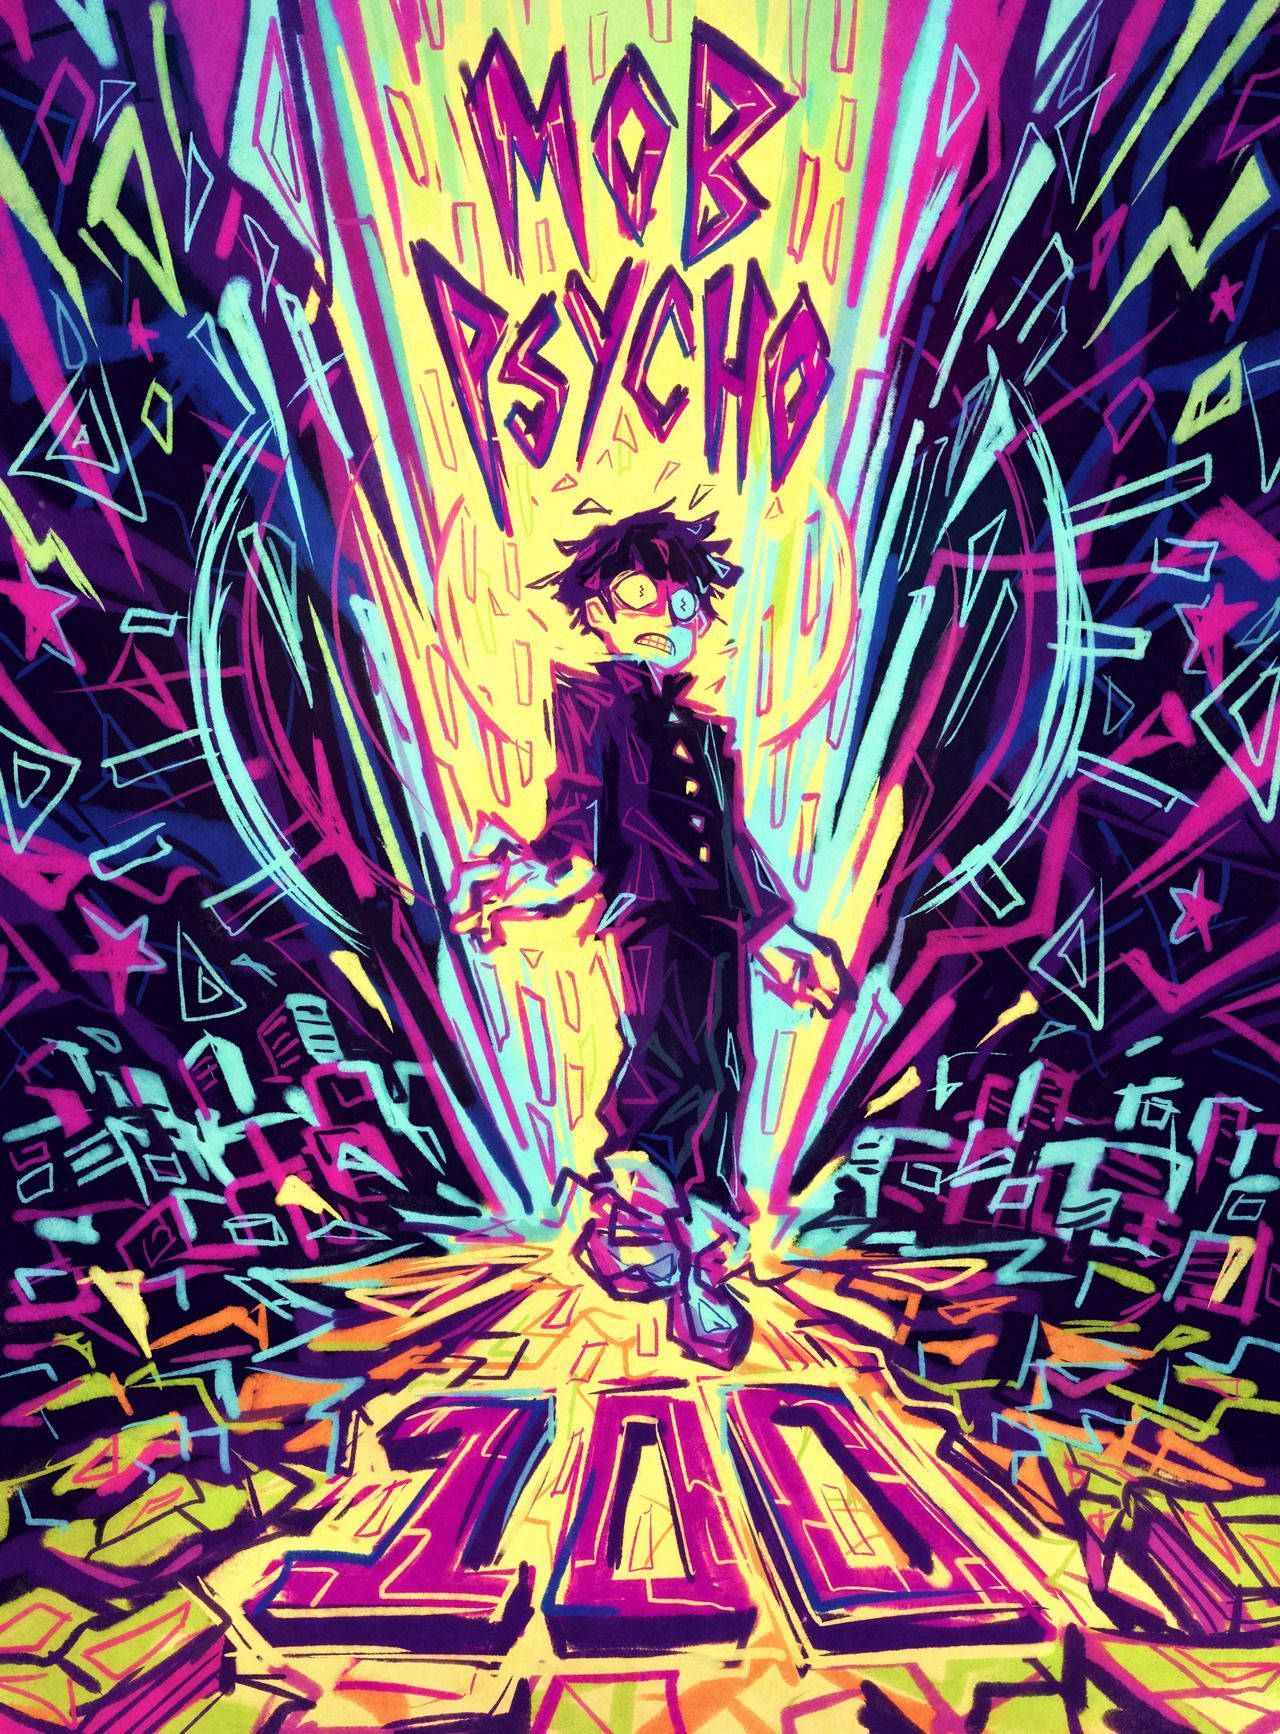 Mob Psycho 100 - Cd Cover Art Background